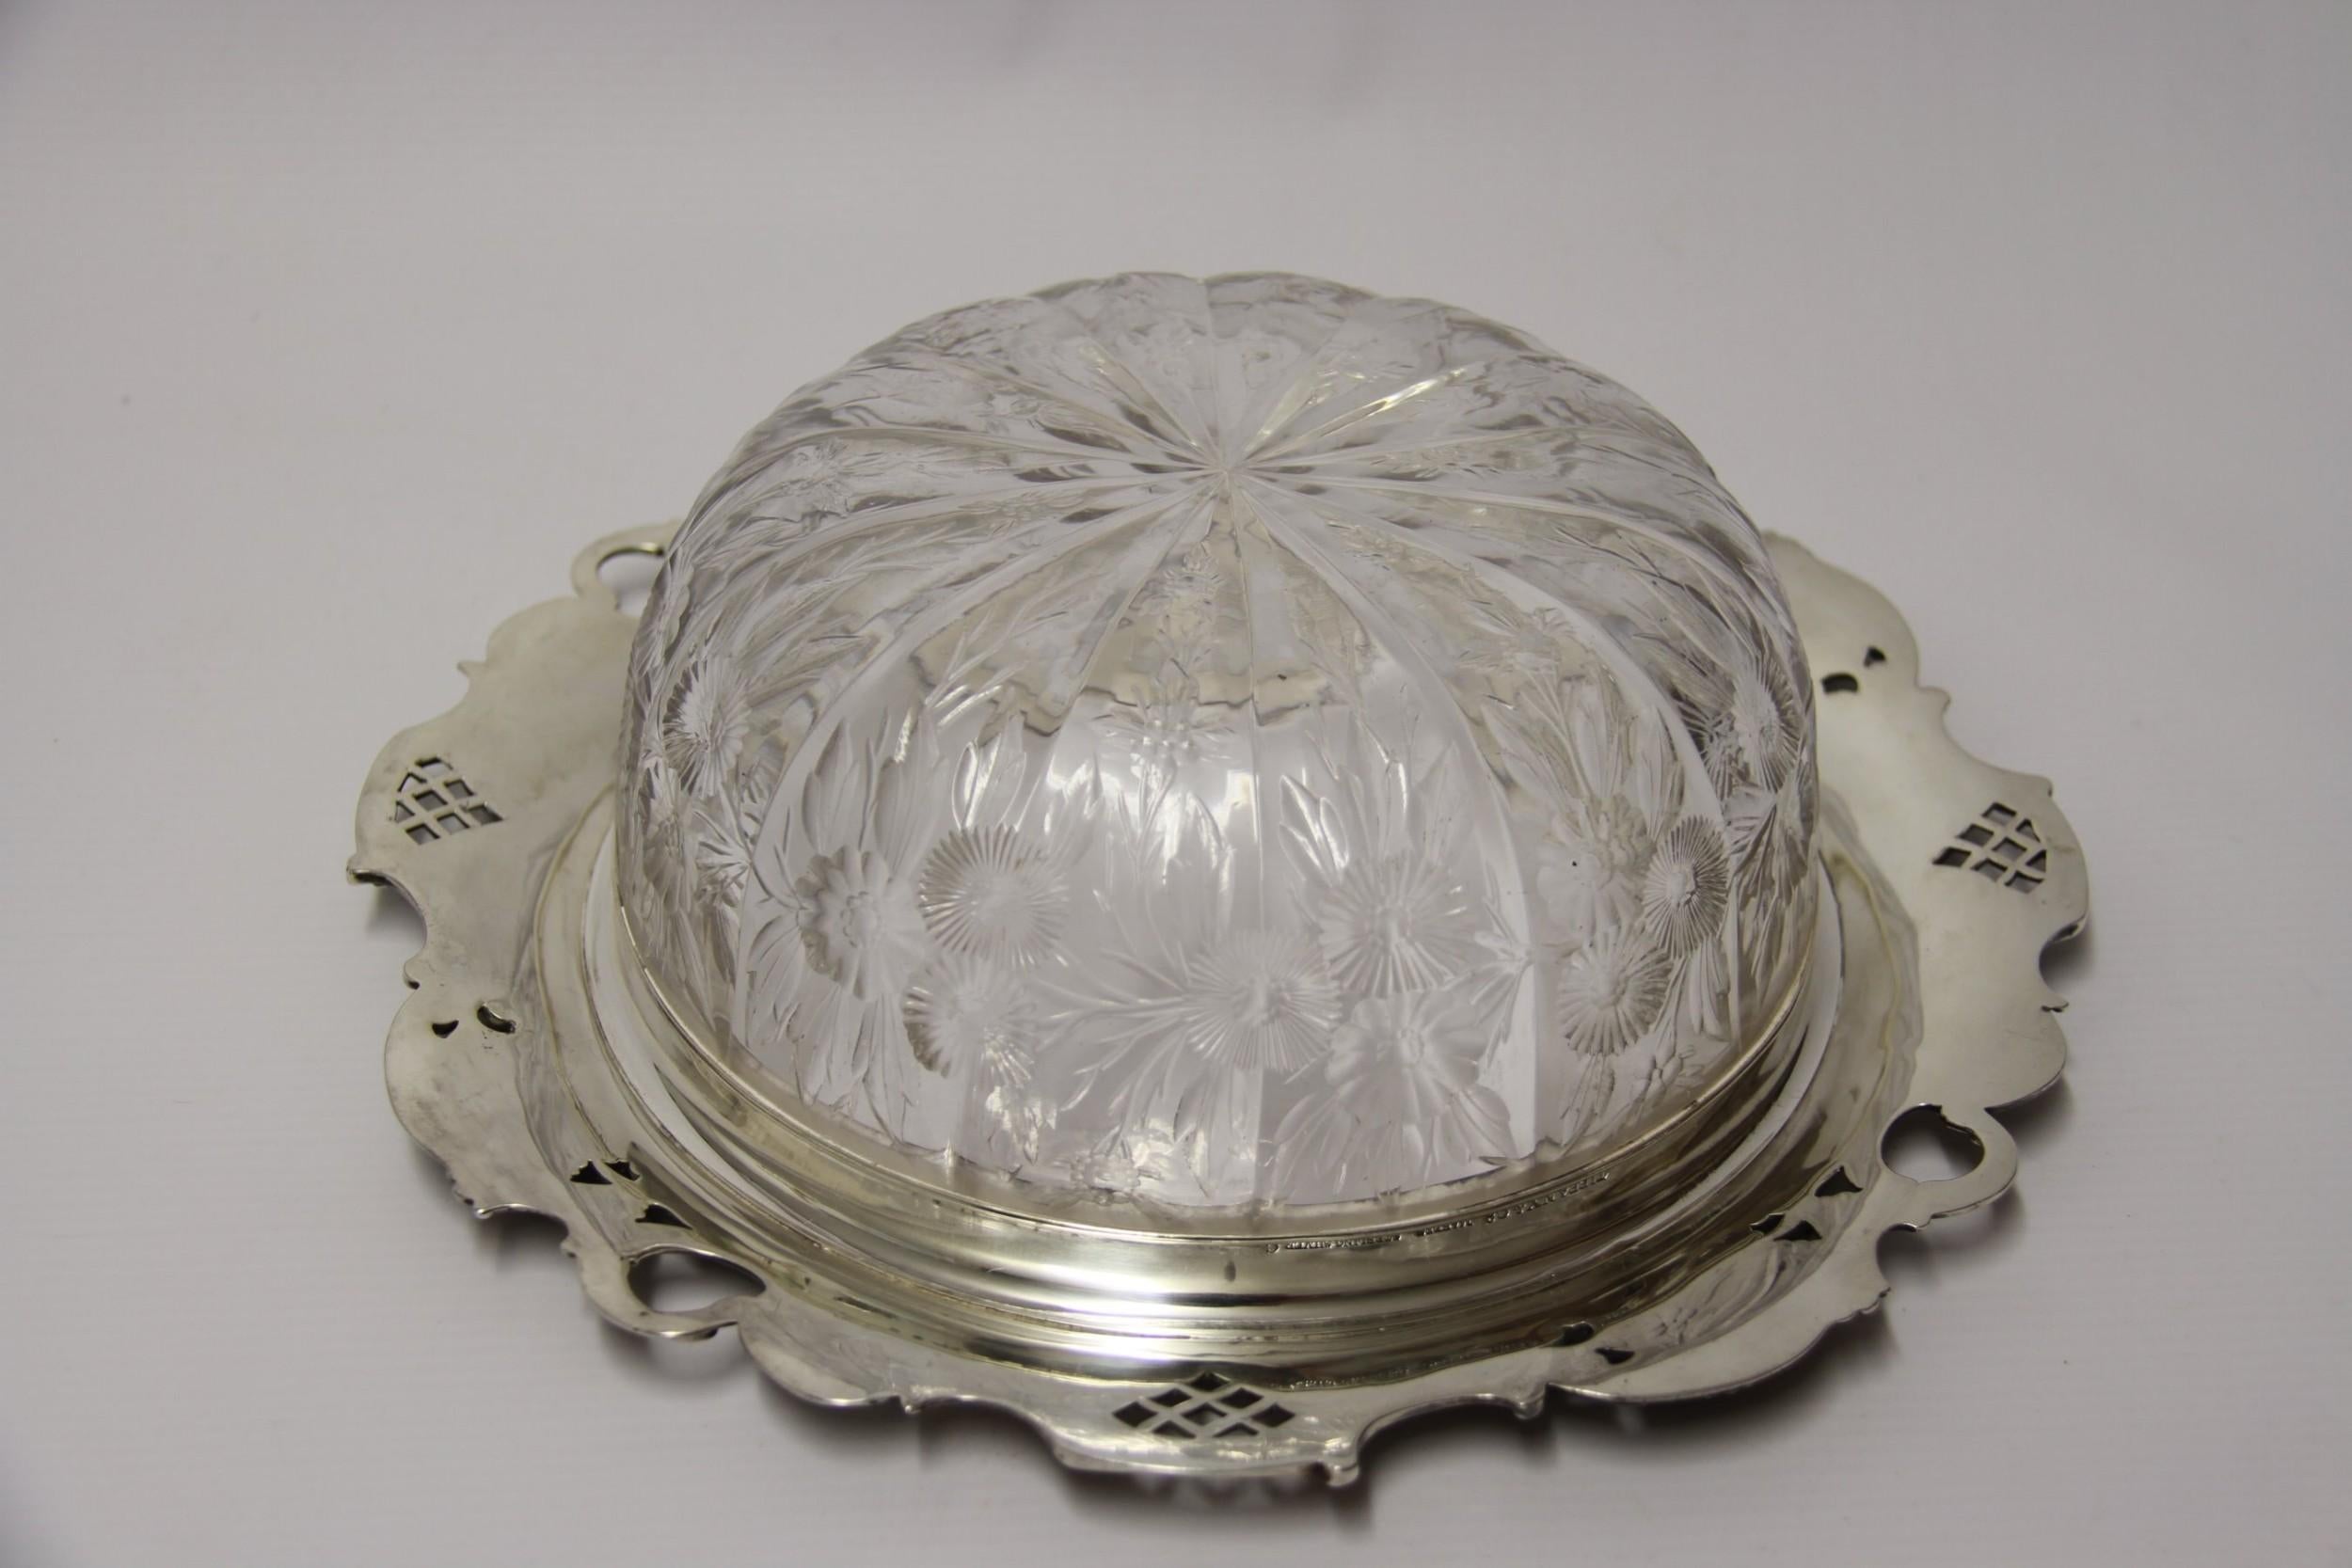 Large Early 20th Century Tiffany & Co. Silver Mounted Intaglio Cut Glass Bowl For Sale 9